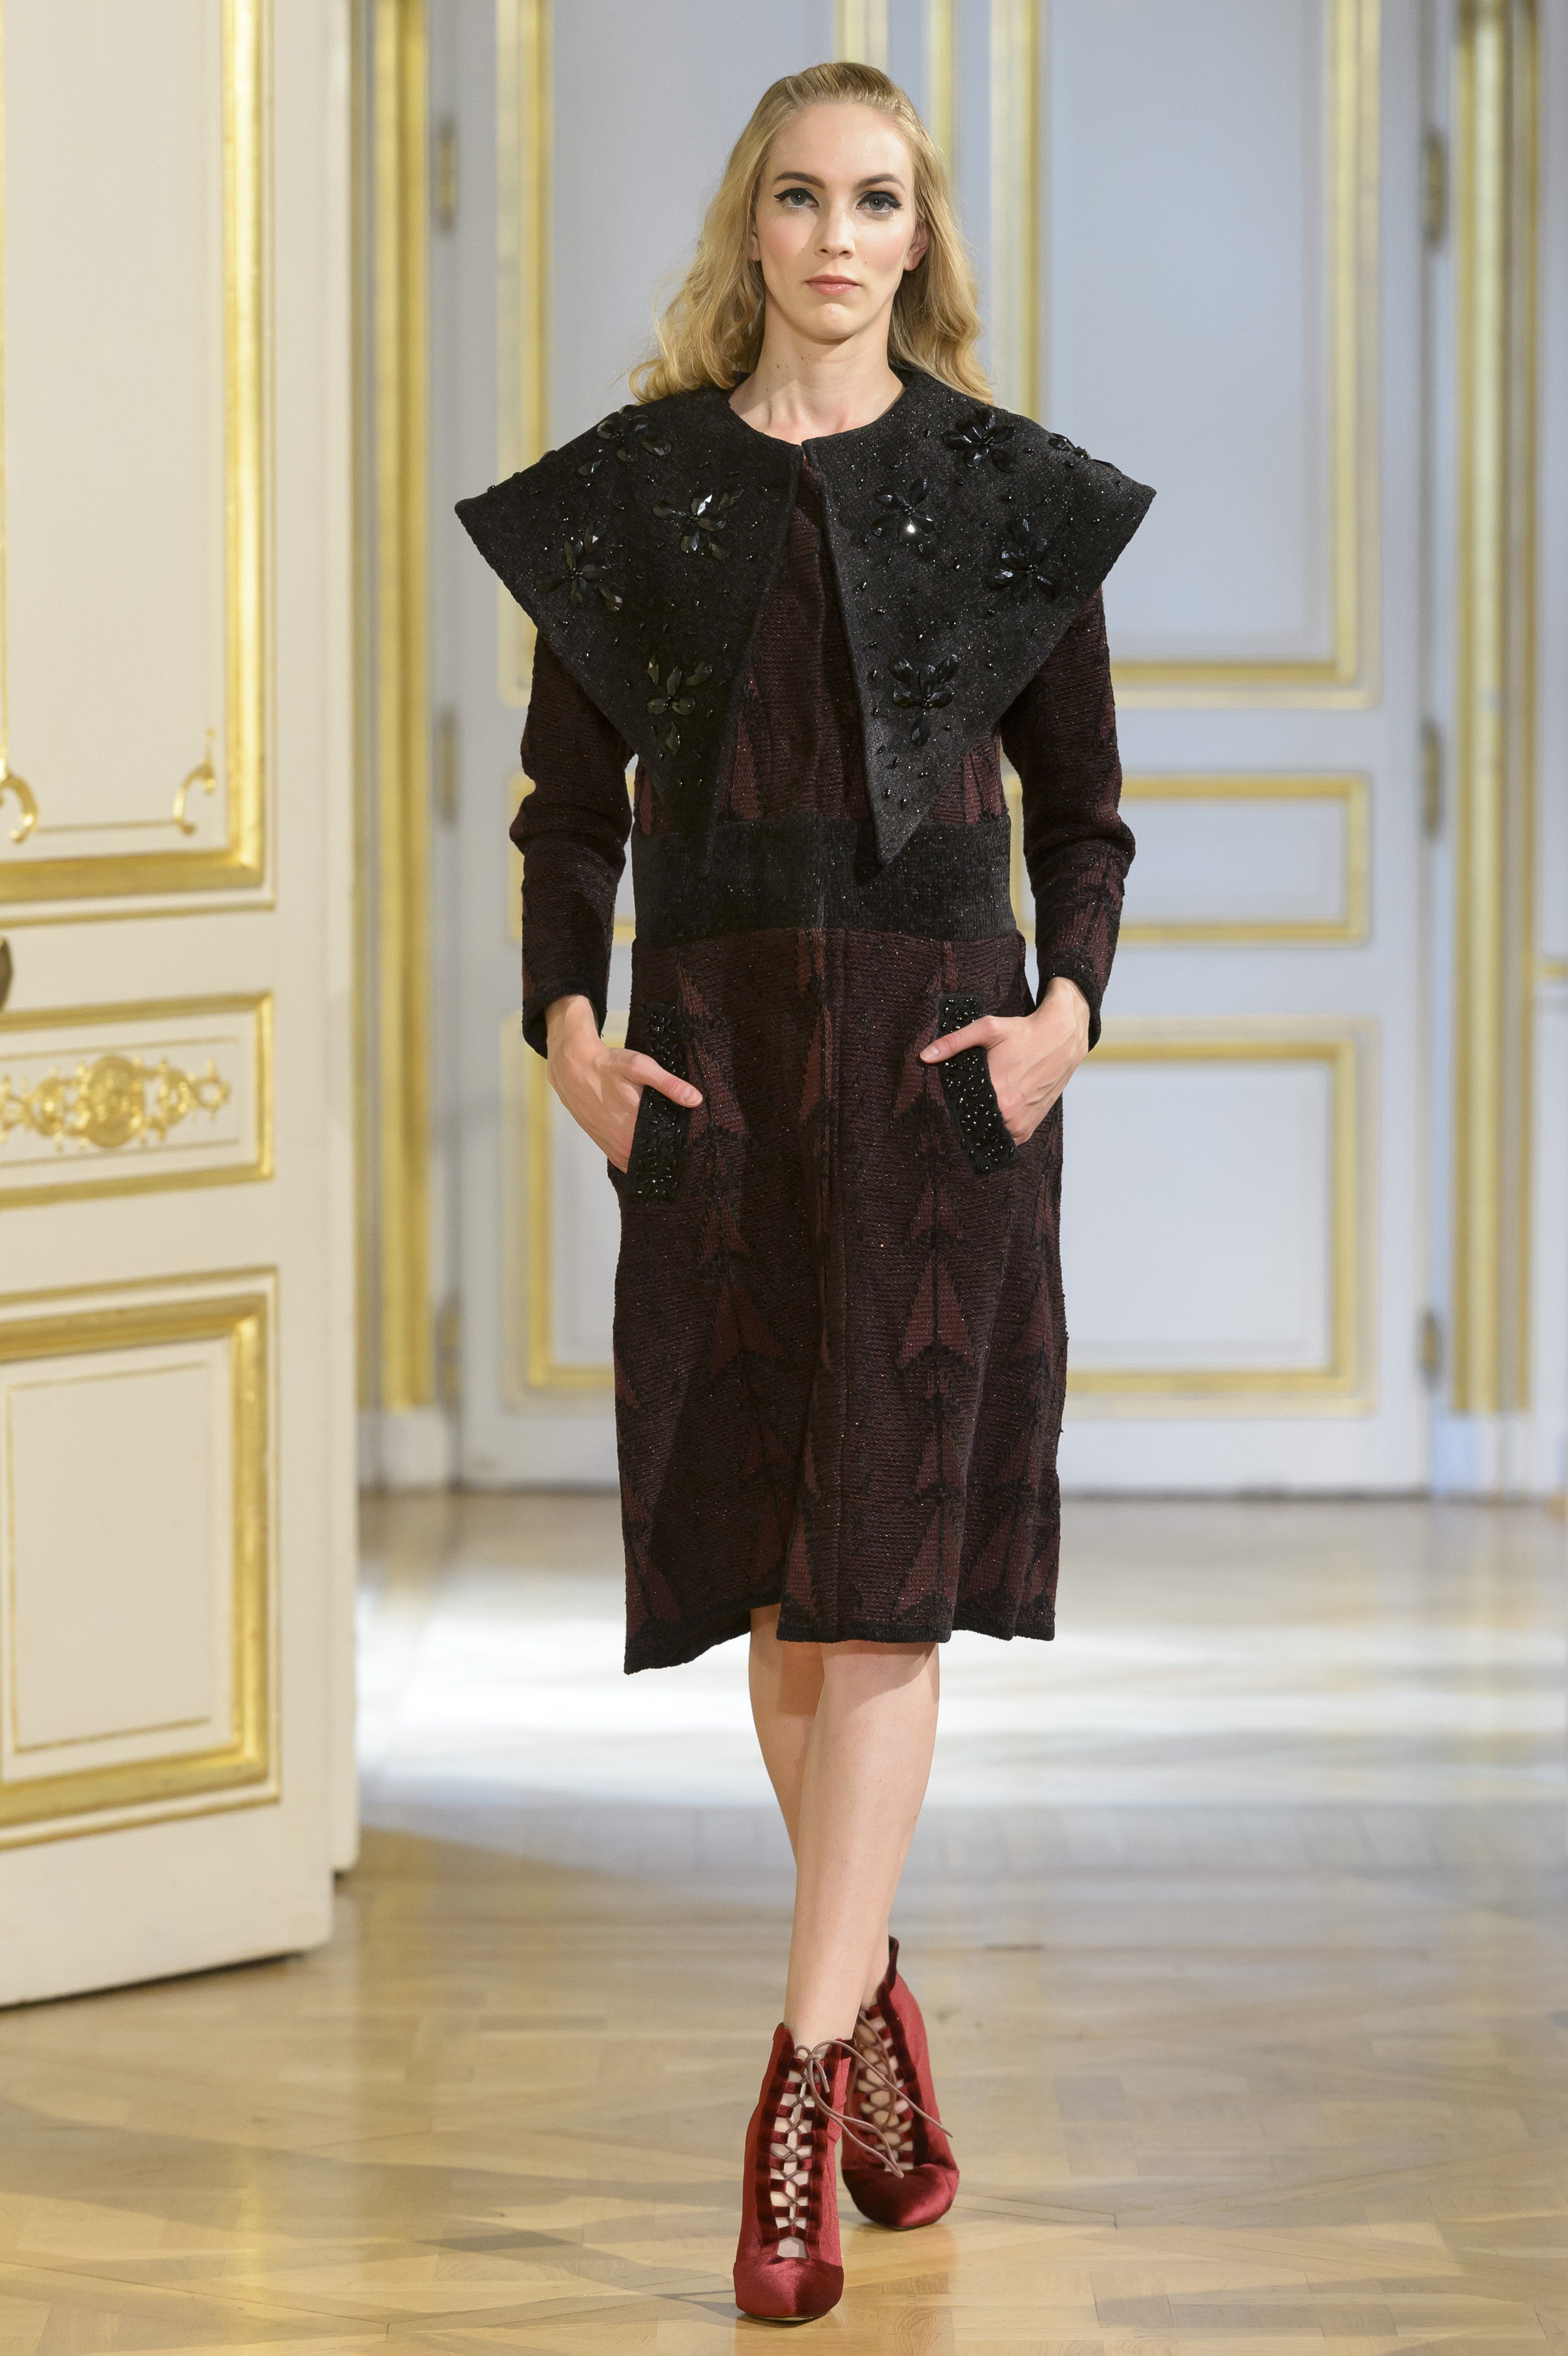 MARIA ARISTIDOU photos defile : fashion show %22Serendipity%22 couture collection automne hiver : fall winter 2018 2019 PFW - © Imaxtree 8.jpg